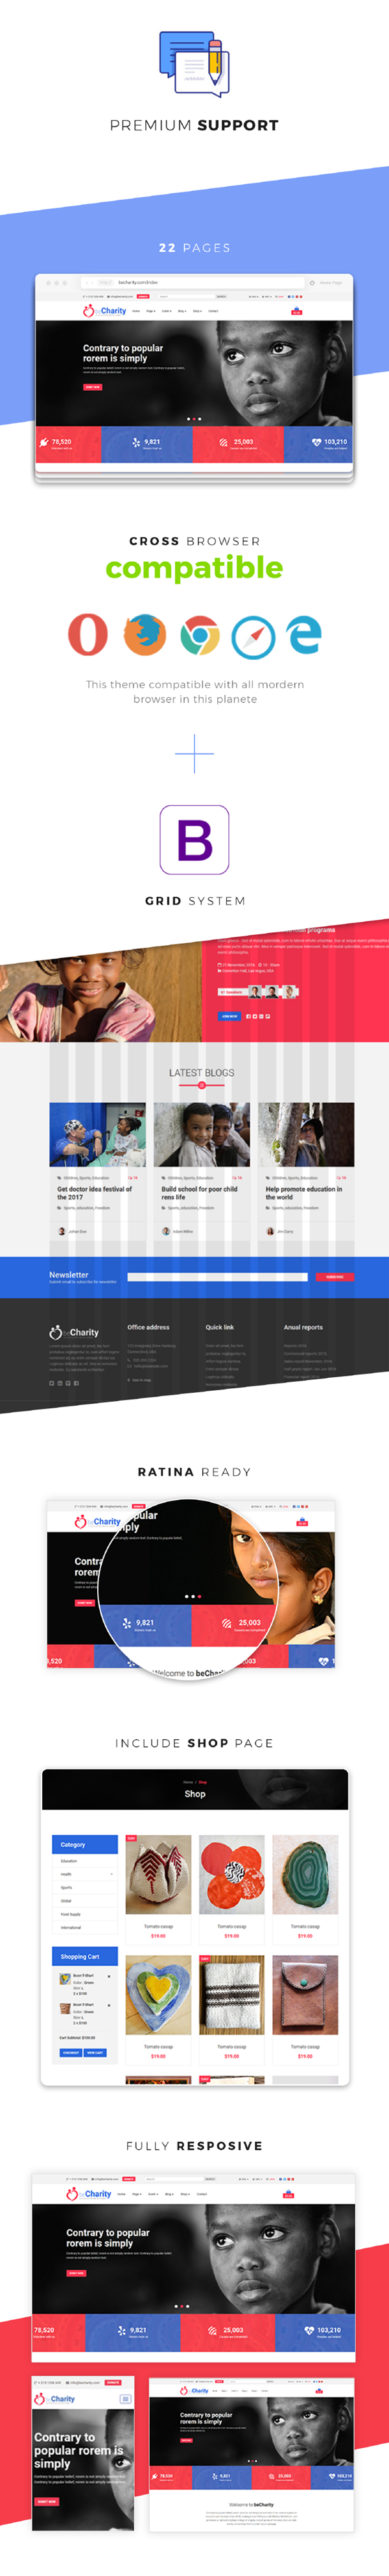 beCharity - HTML5 Charity Template - 2